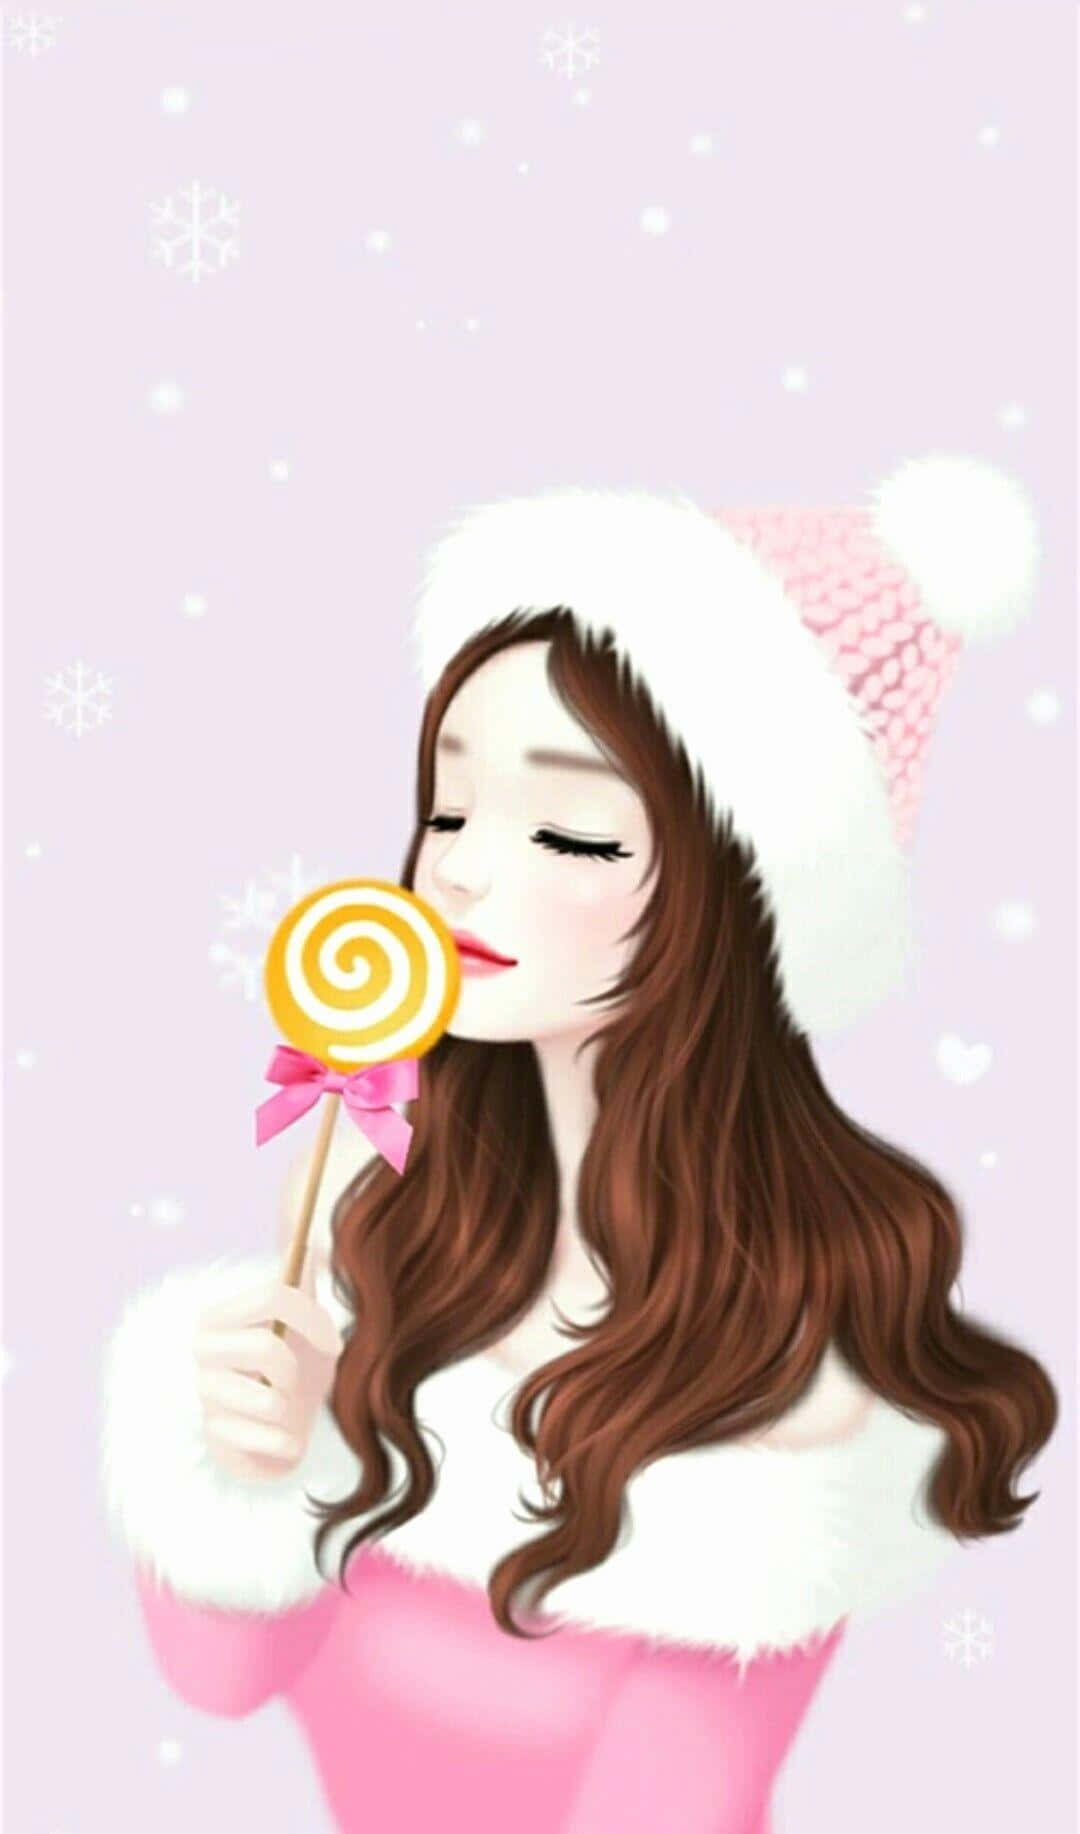 Korean Anime Girl In Pink And White Winter Outfit Background